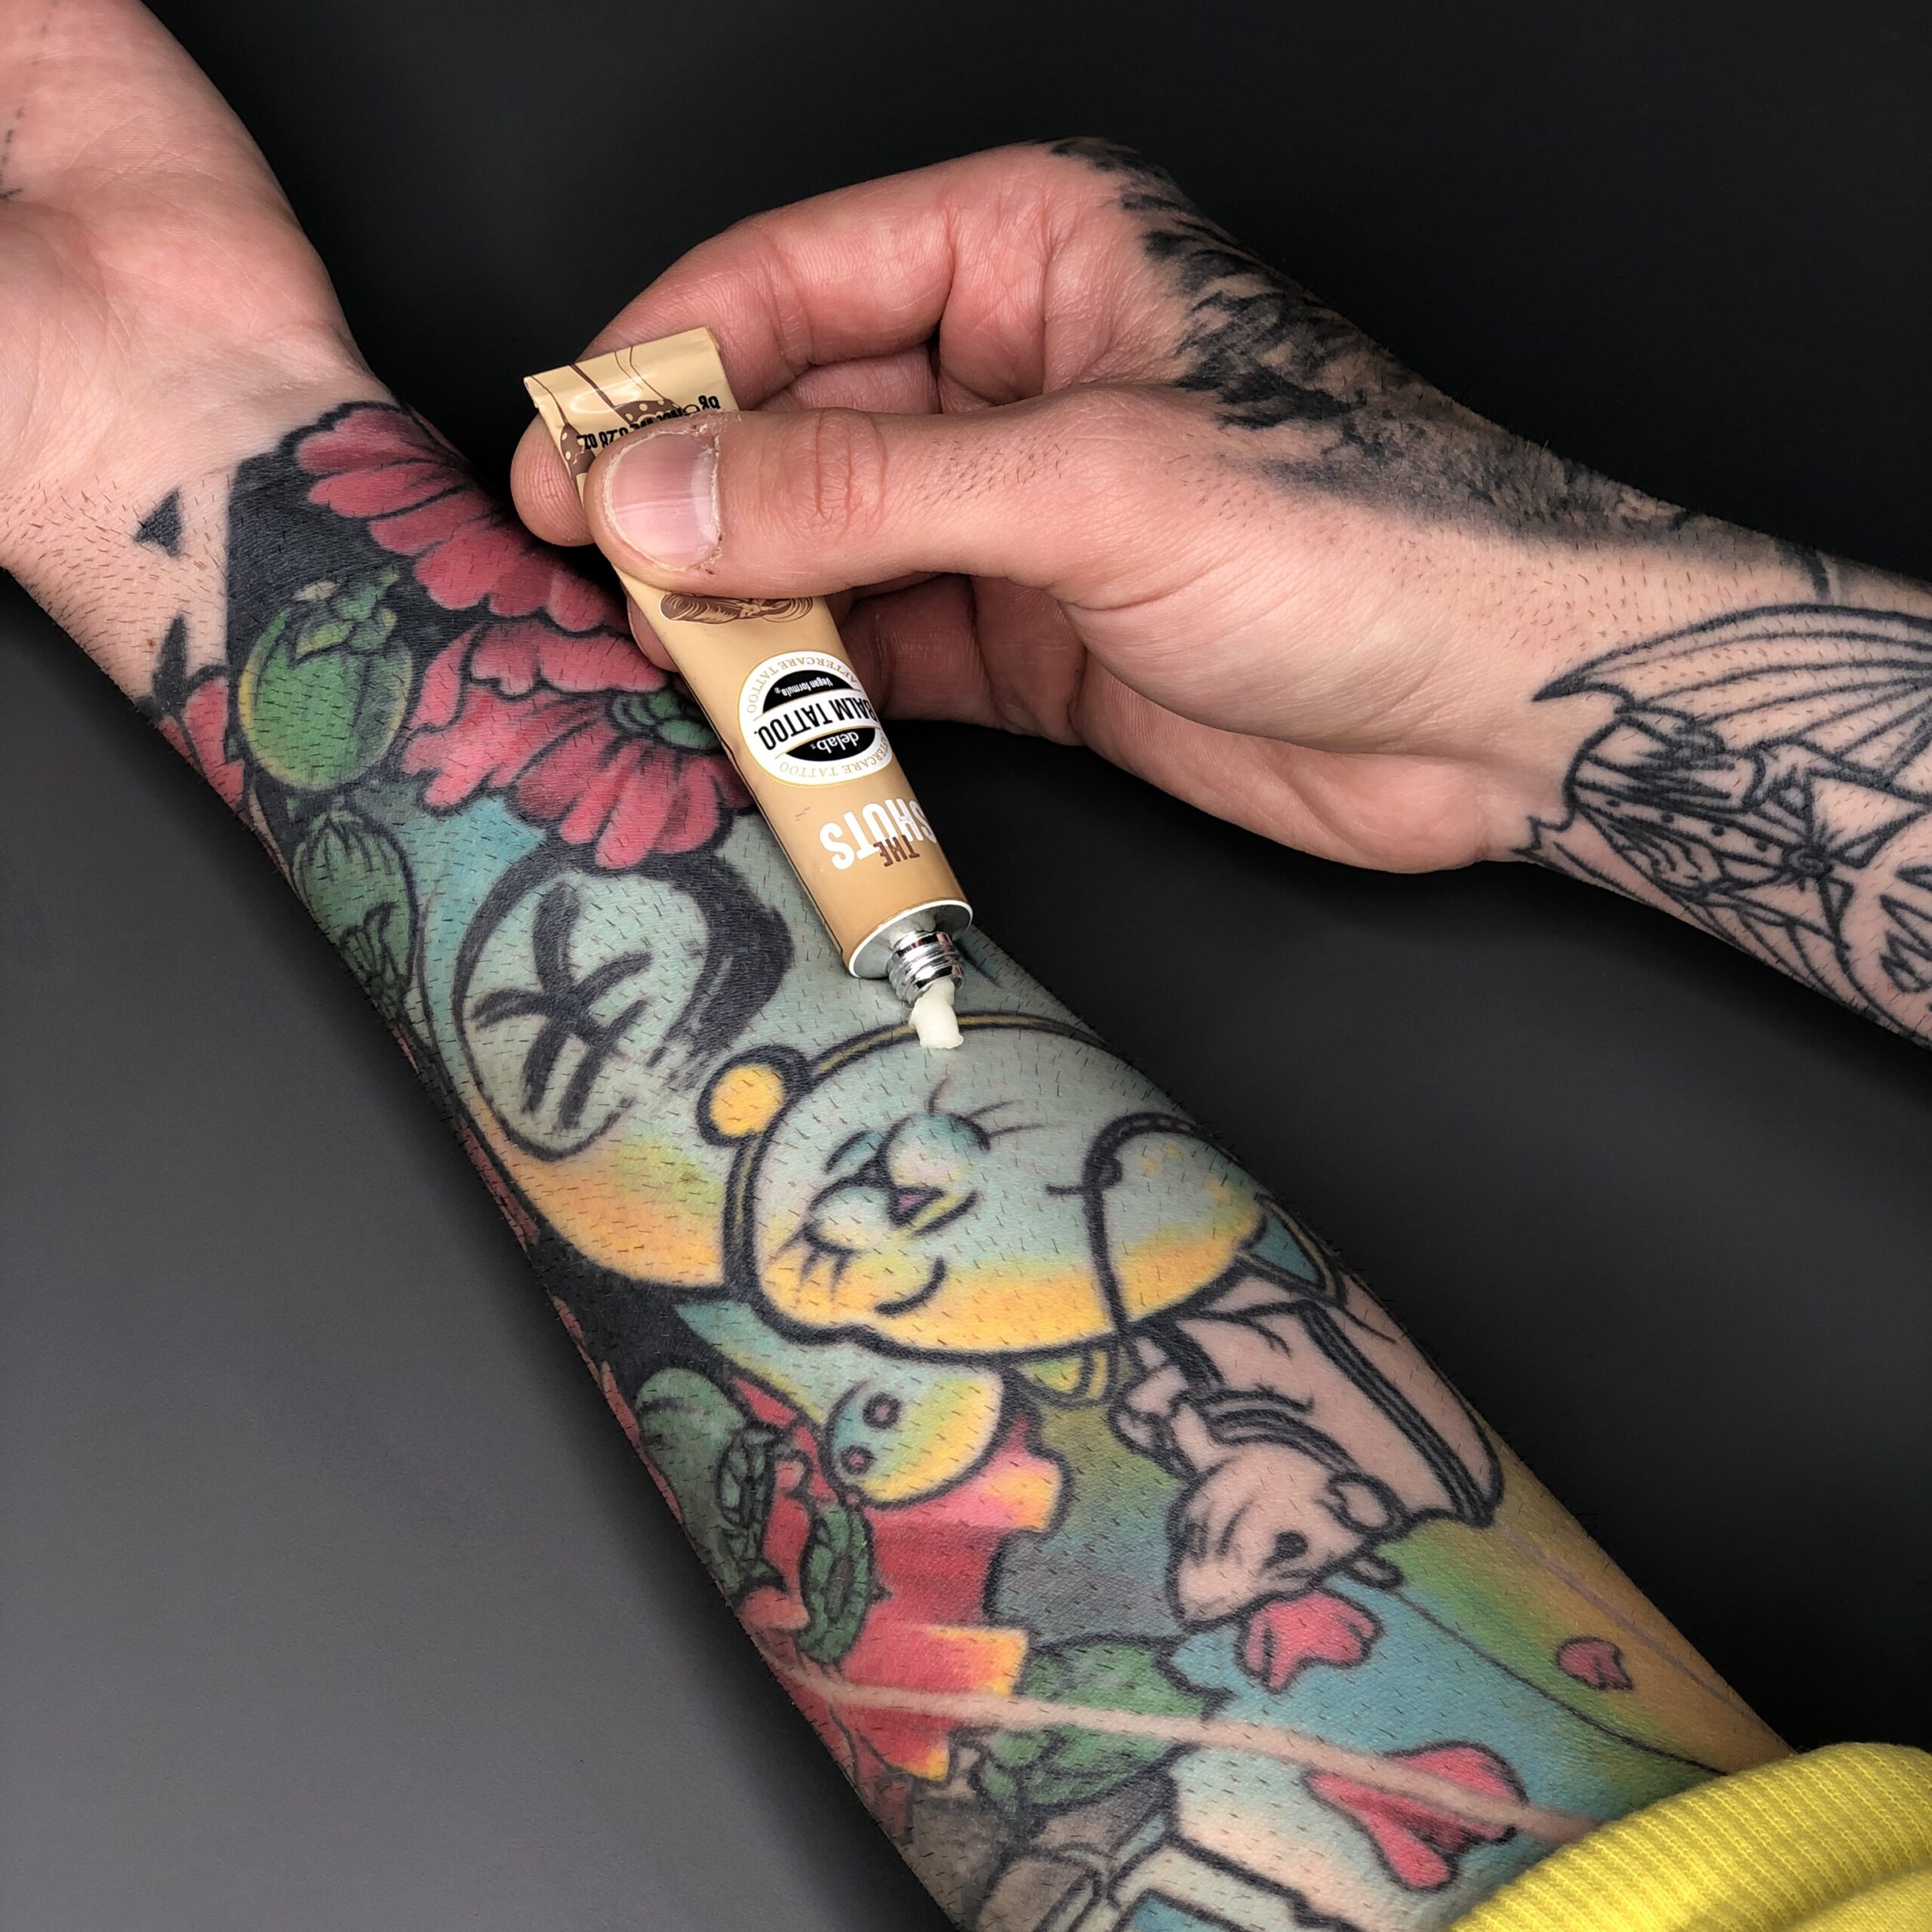 What you need to know about tattoo healing | Blog | Smiley Dogg